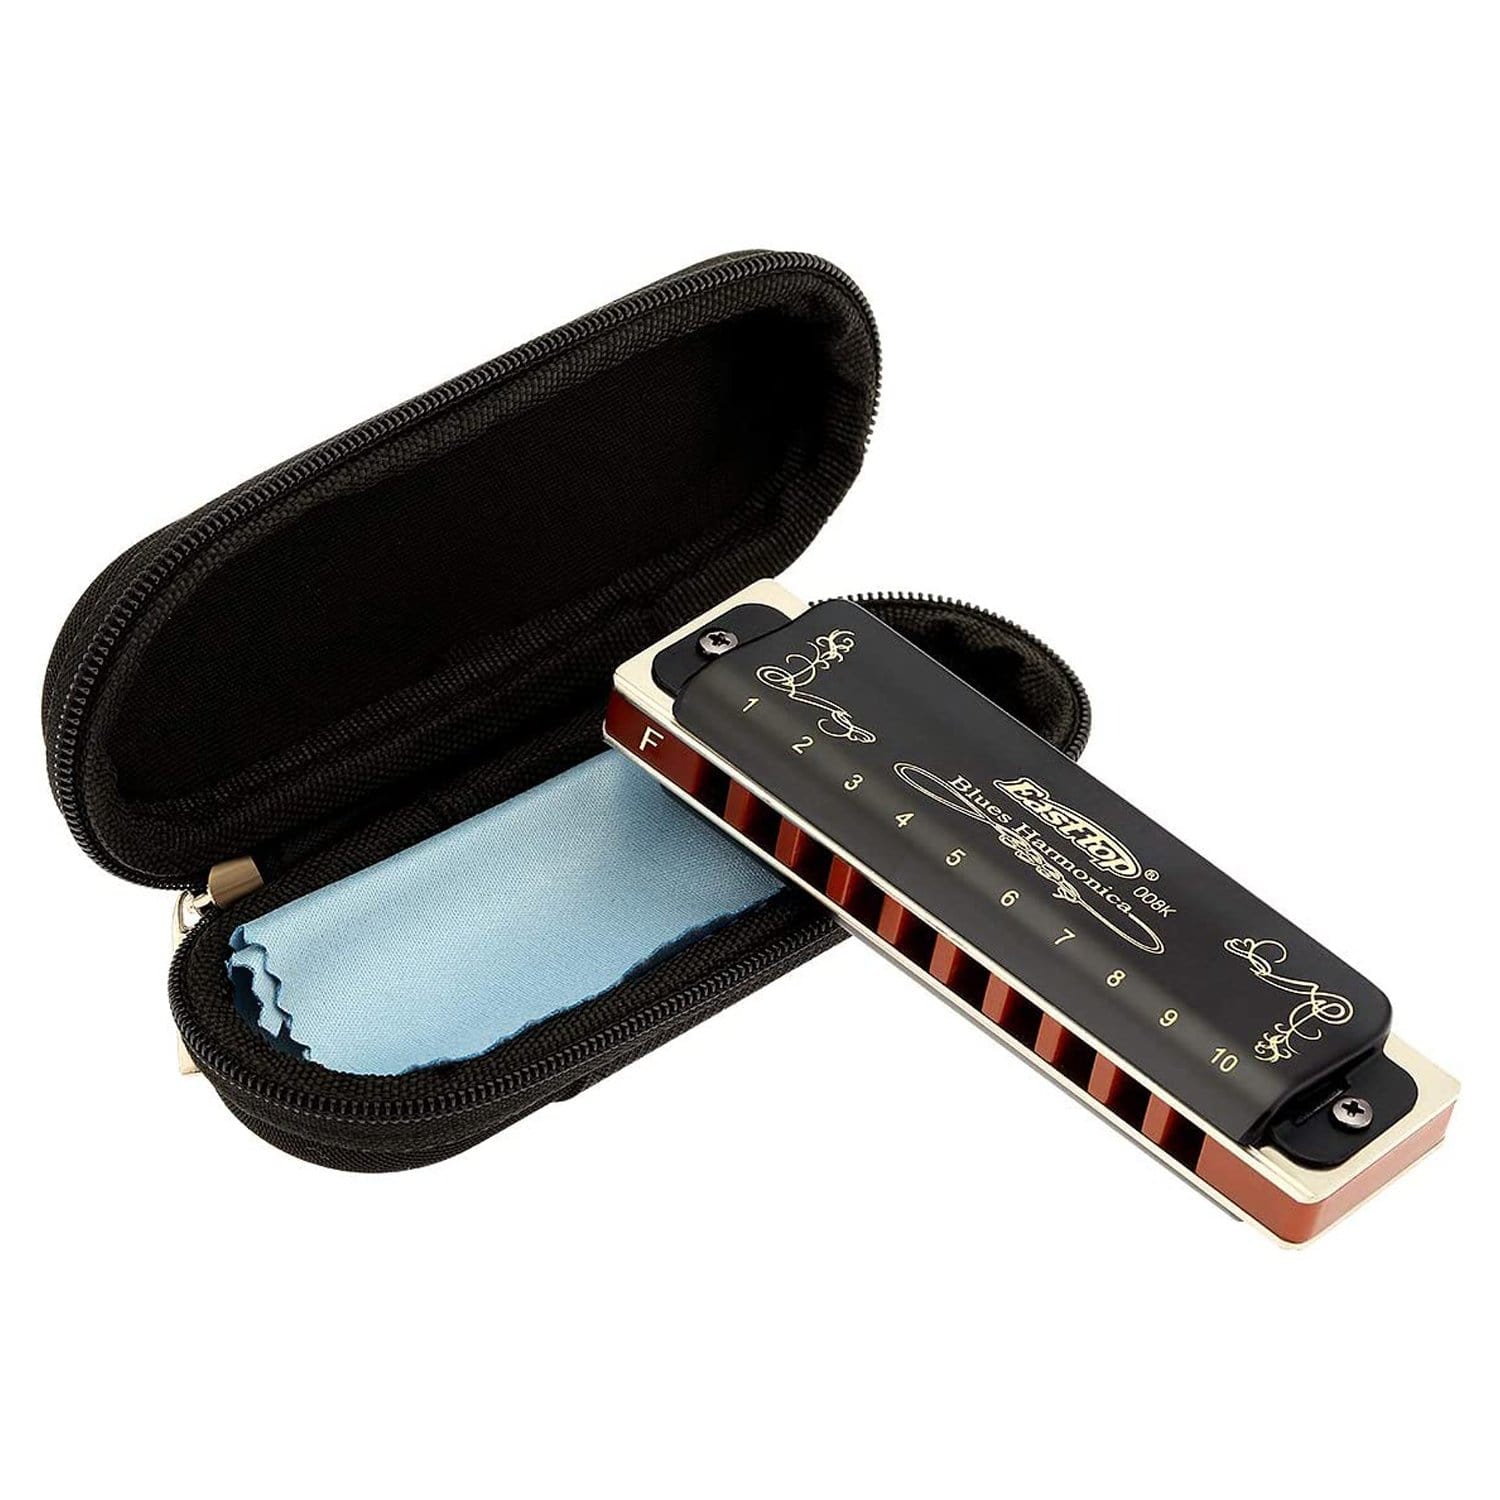 East top 10 Holes 20 Tones 008K Diatonic Harmonica  with Blue/Black/Sliver Case, Major 12 keys available,Standard Harmonicas For Adults, Professional Player, Beginner and Students（T008K-BL/BK/SR）